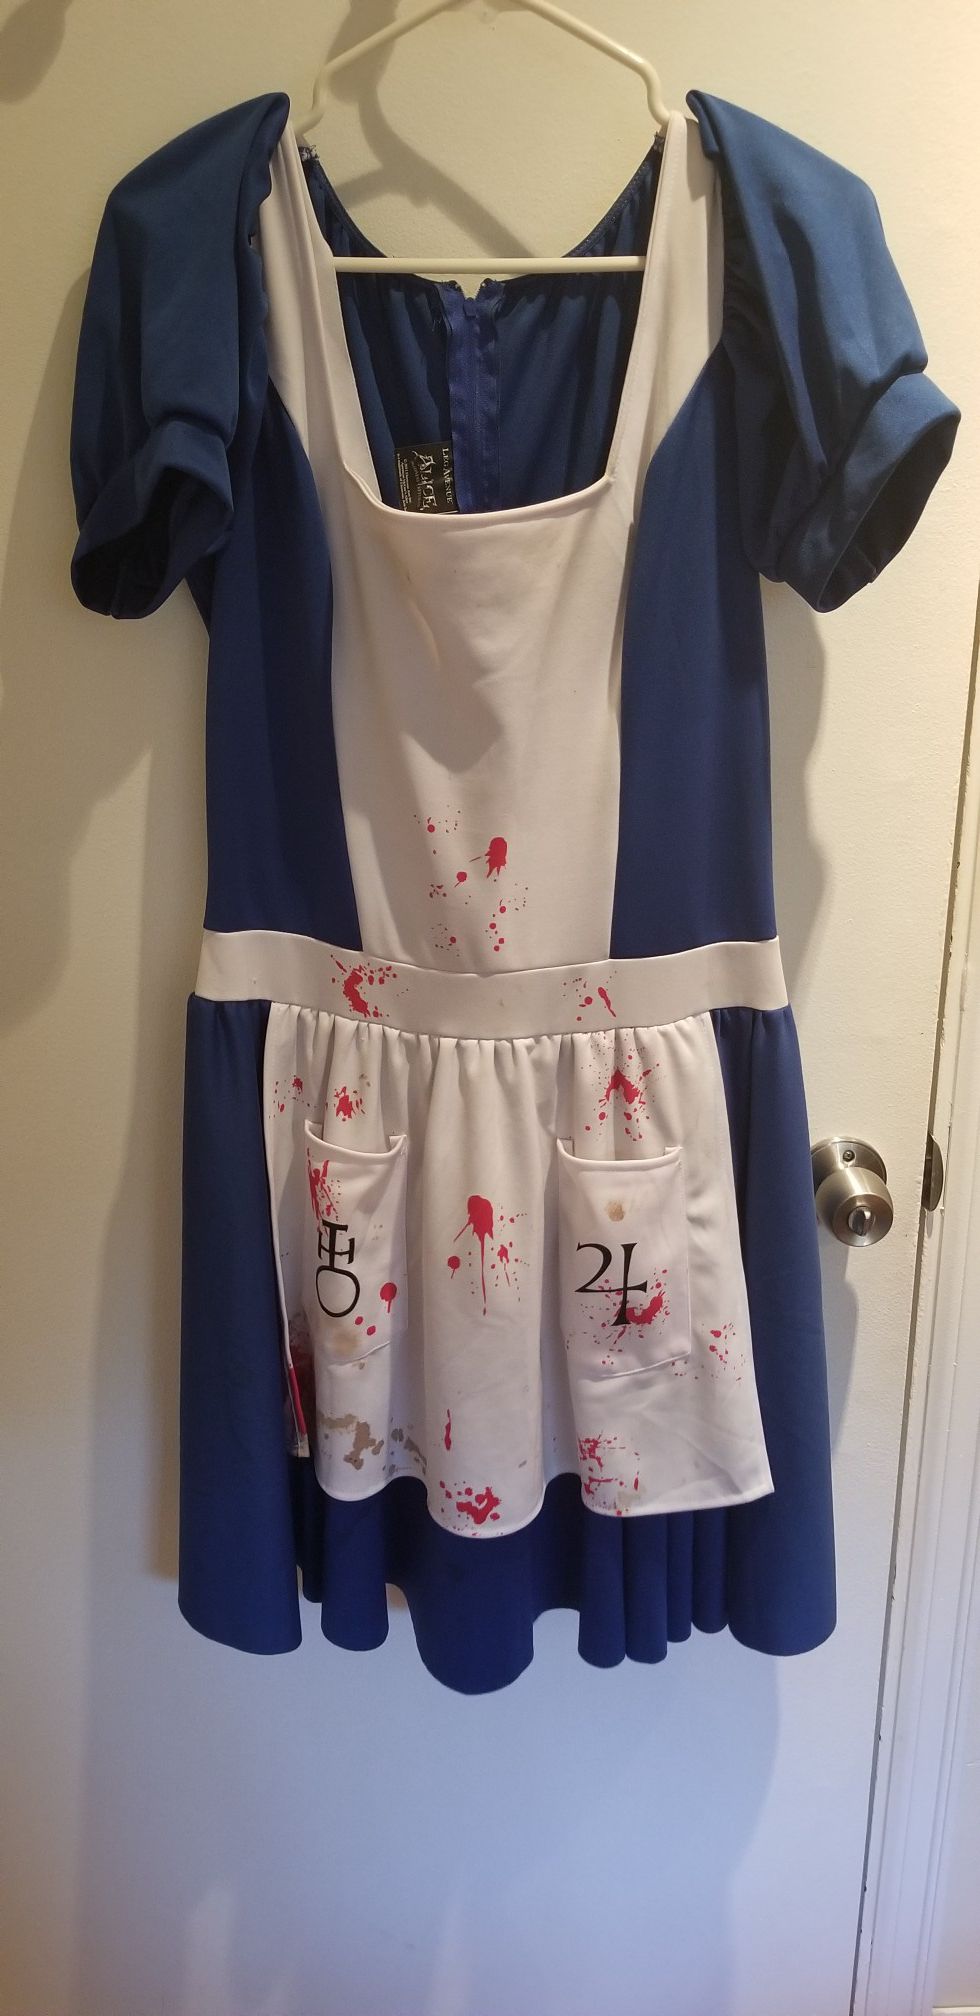 How to: make American McGee's Alice 2 Dress